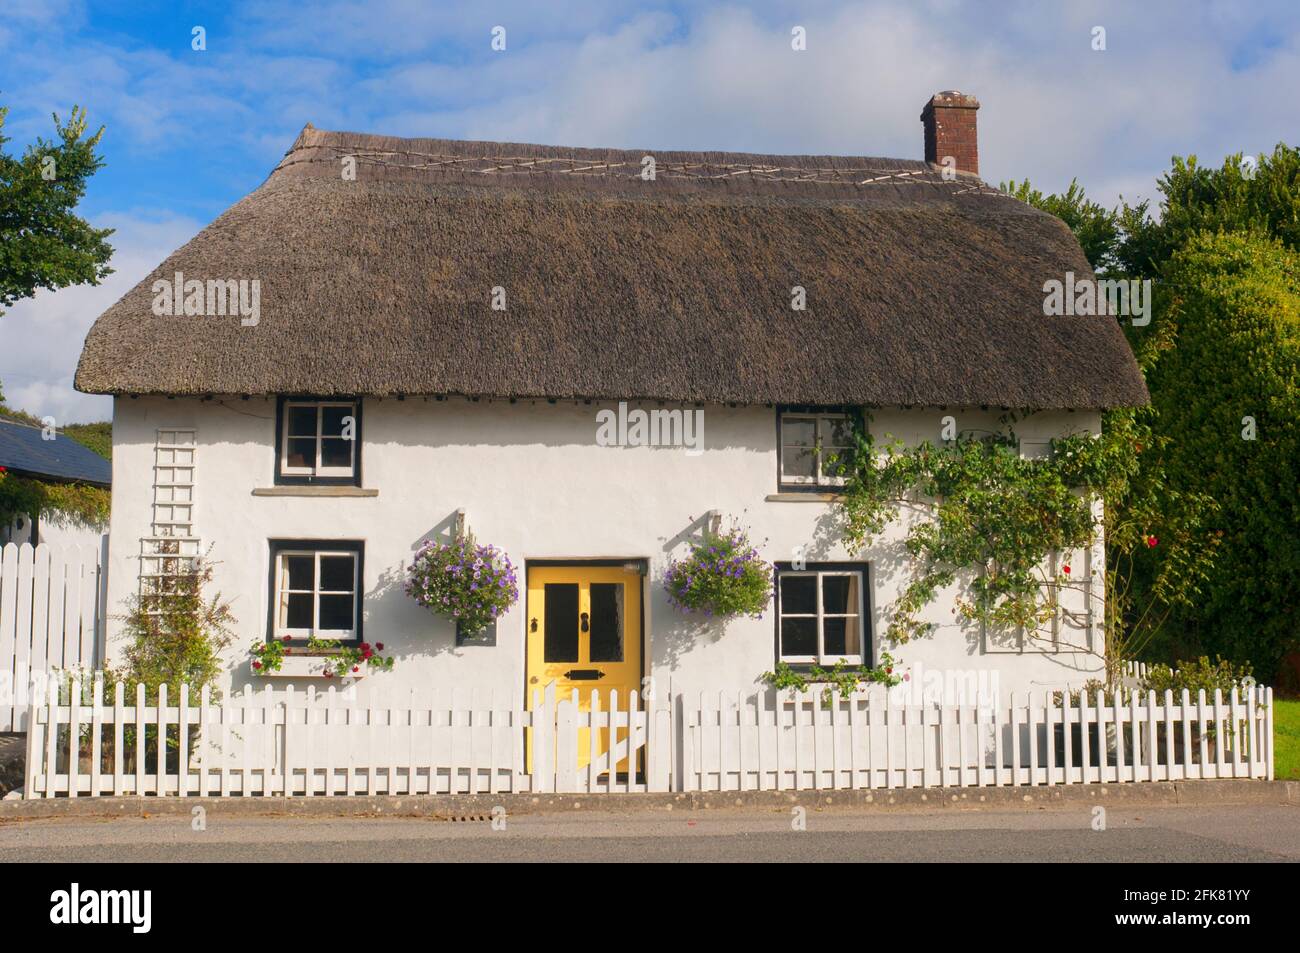 Pretty thatched cottage in Gunwalloe, Cornwall, UK. This house was once the residence of Compton Mackenzie, the author of Whiskey Galore - John Gollop Stock Photo